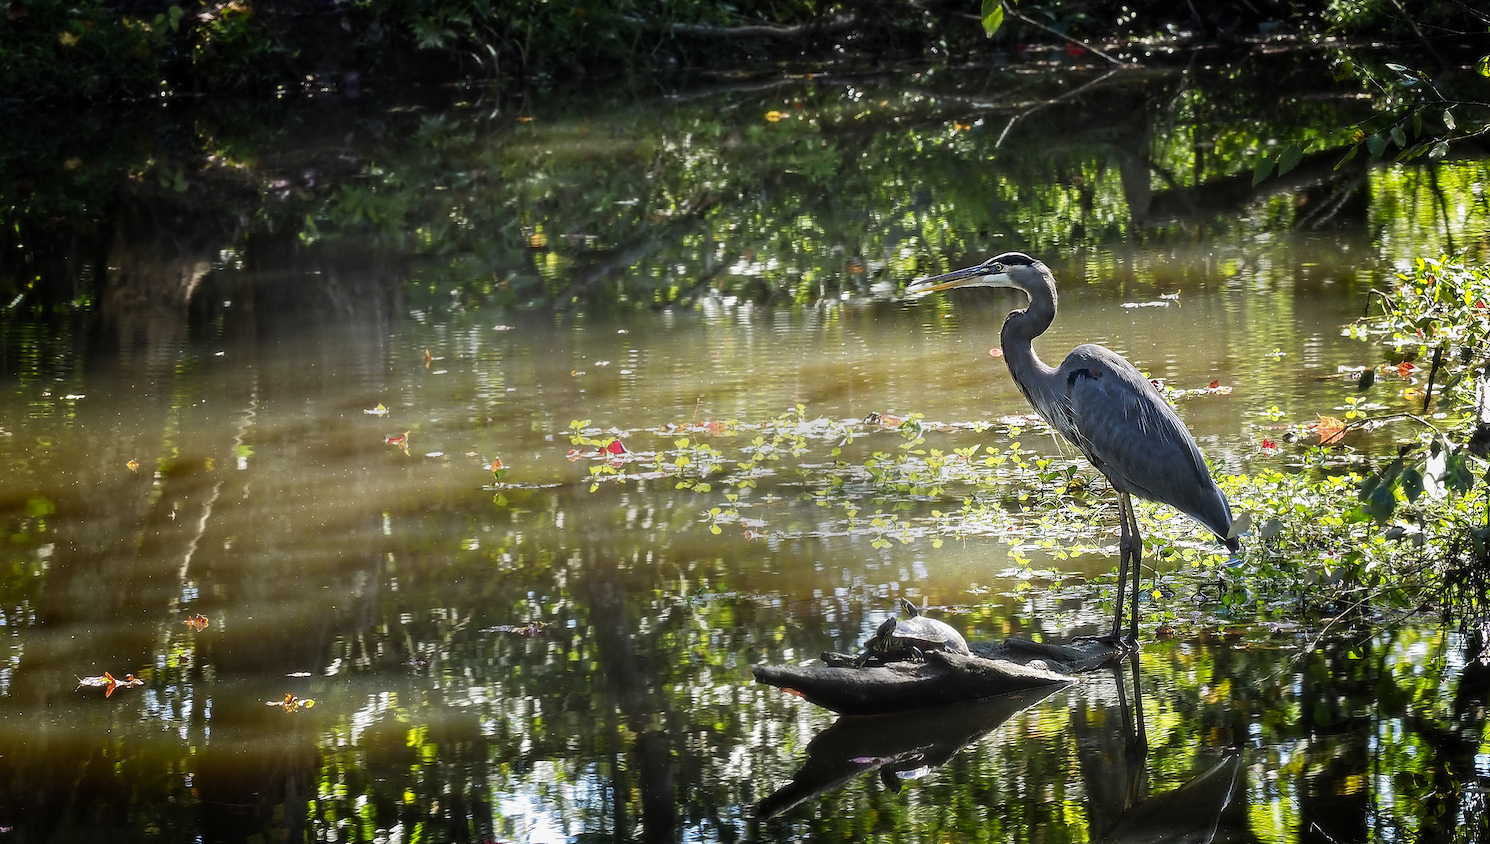 A blue heron waits for lunch in the marshland area next to Lake Raleigh on Centennial campus.